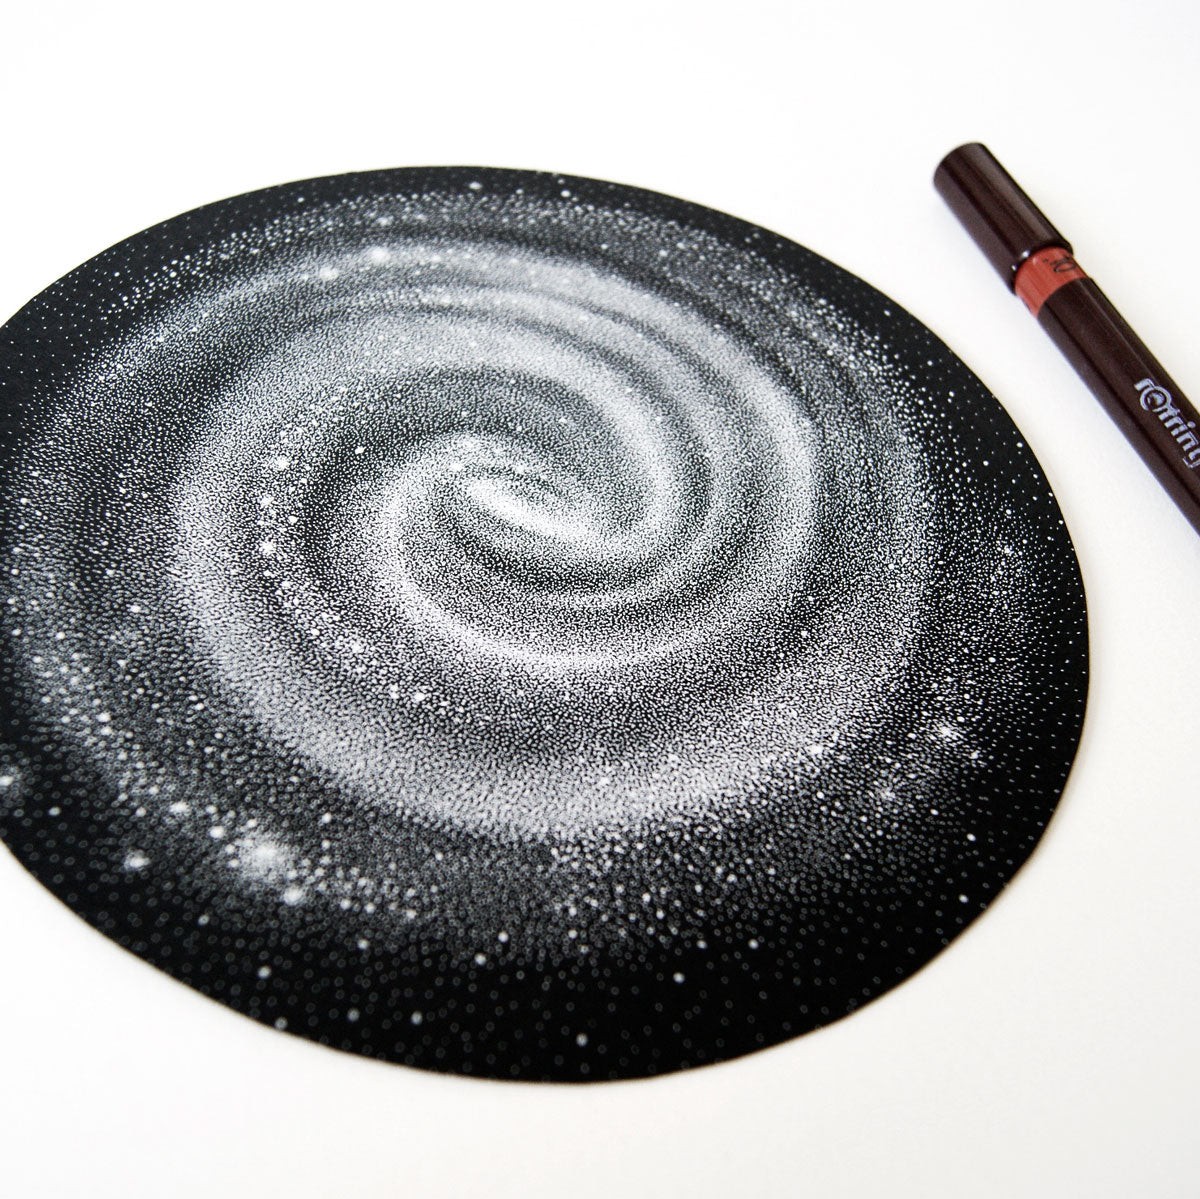 KREA - a painting of a spiral galaxy , pointilism, rough charcoal sketch